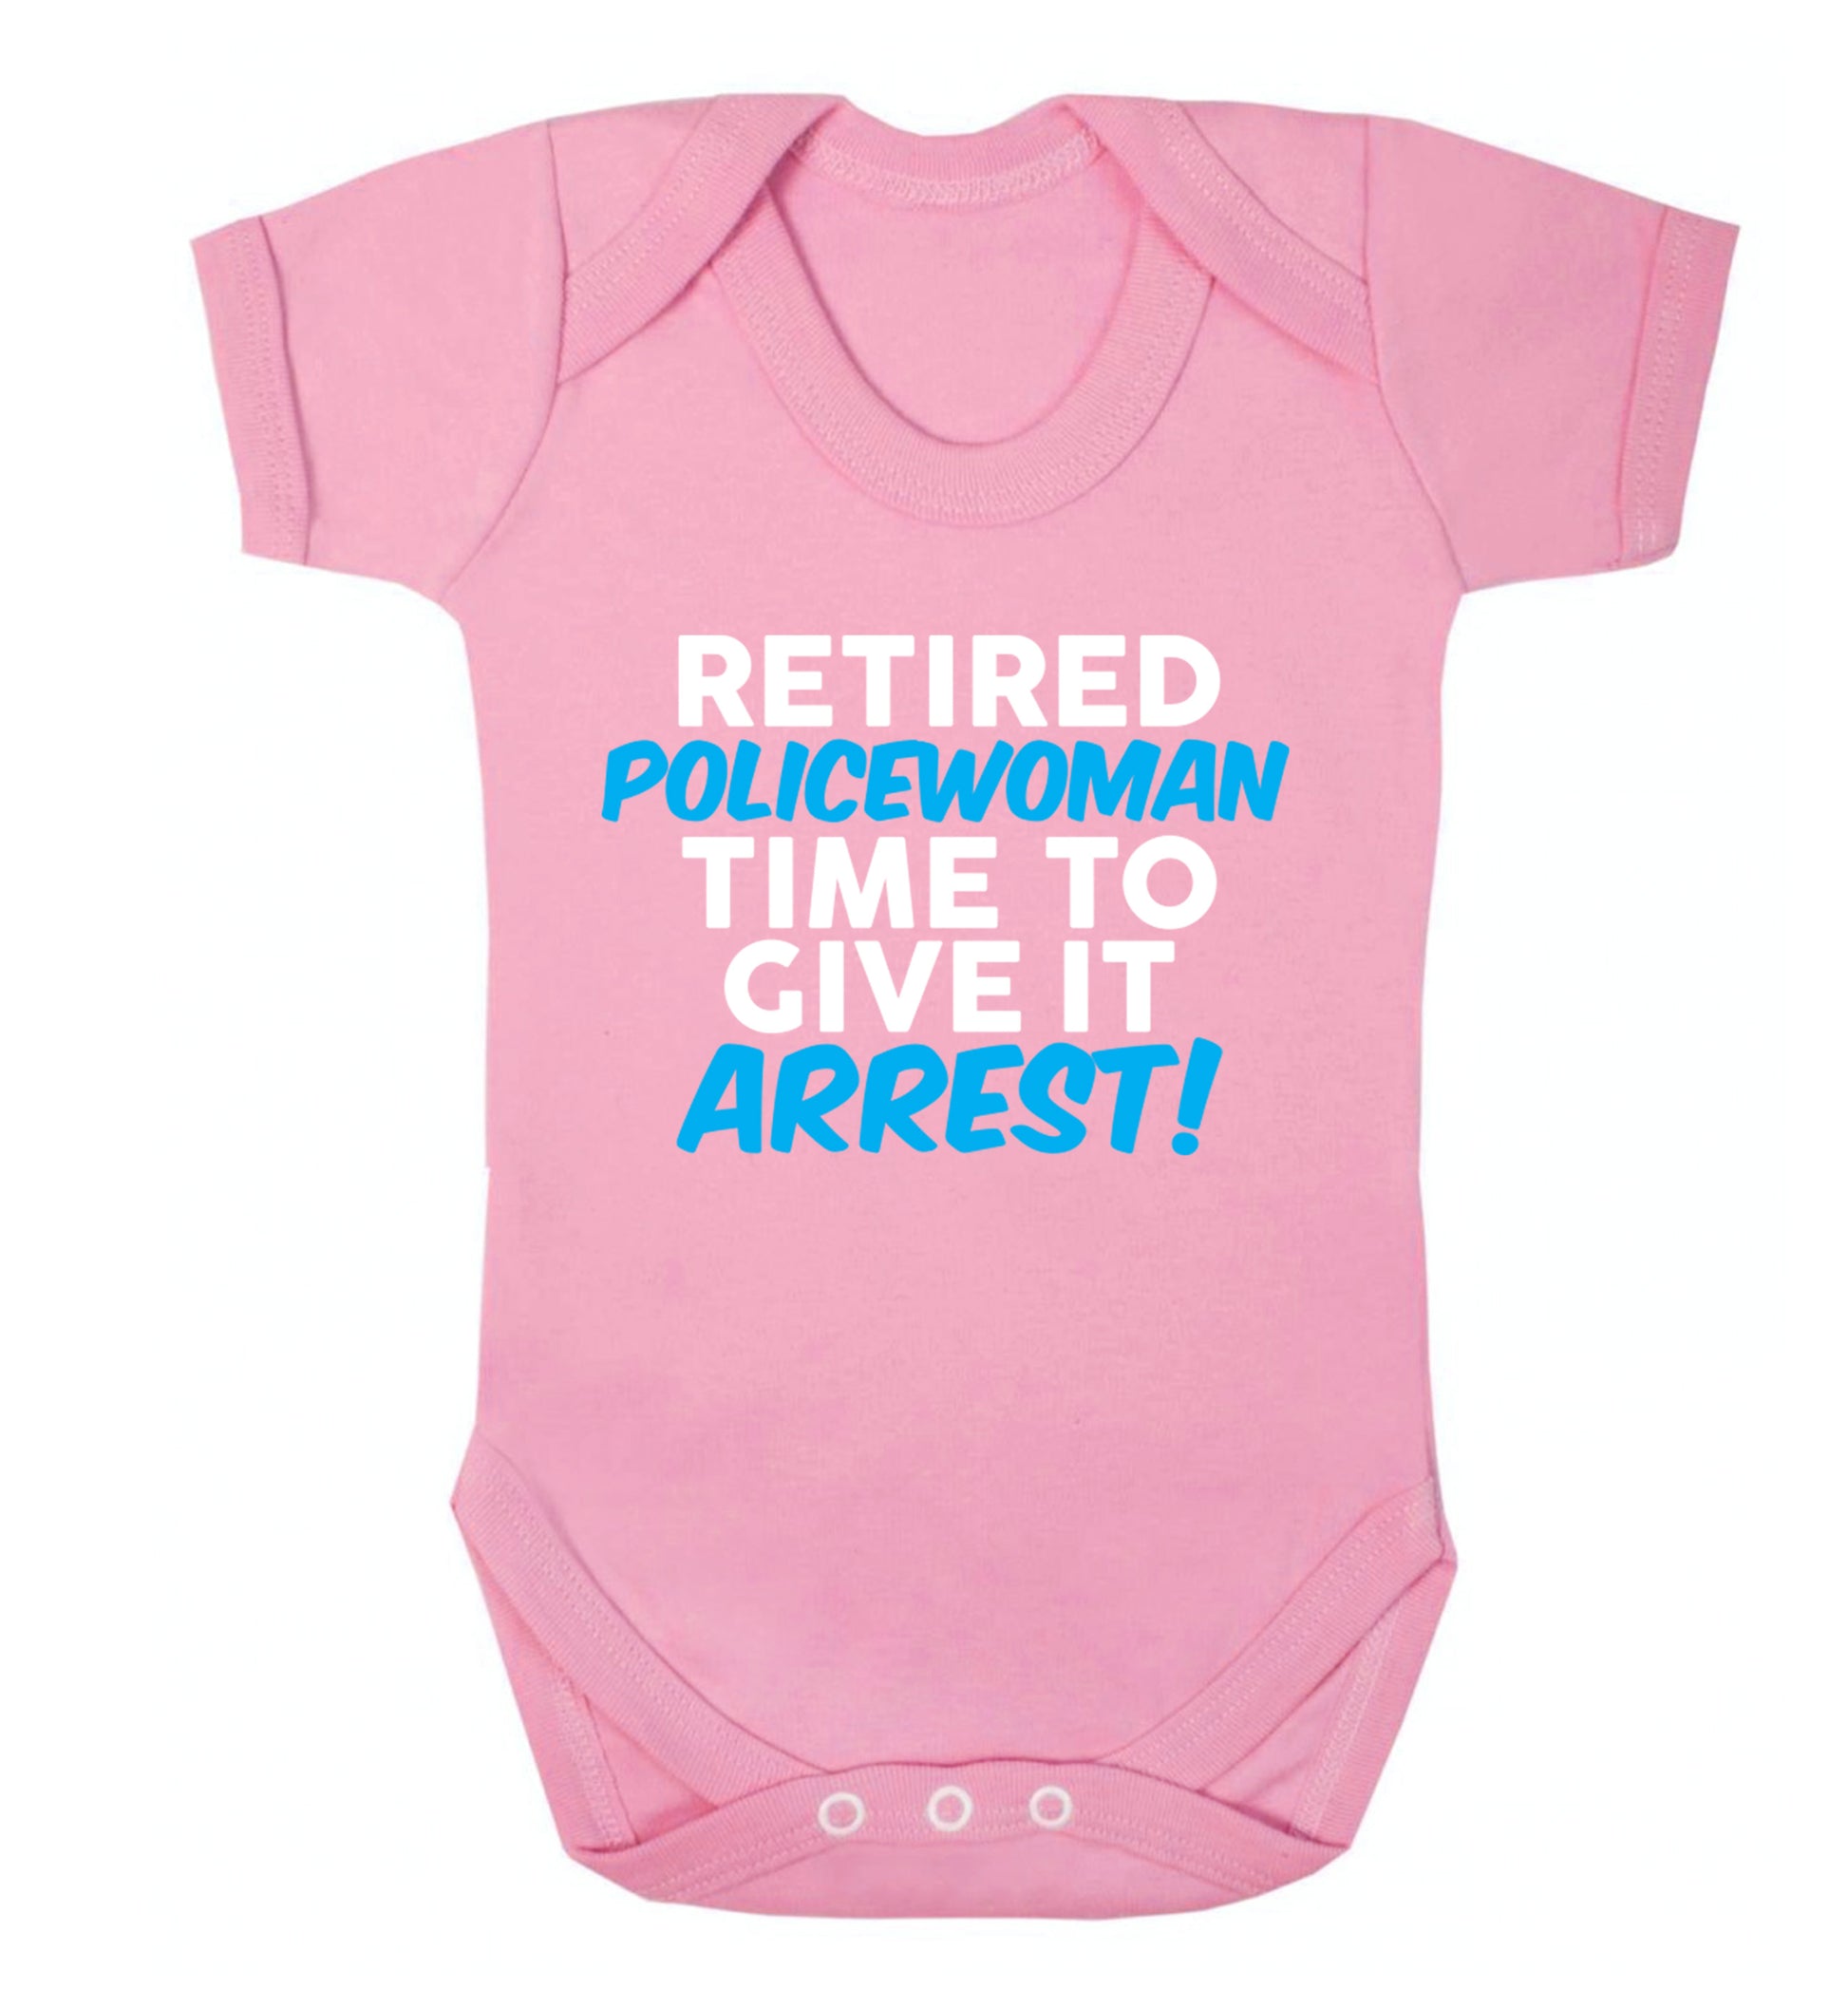 Retired policewoman time to give it arrest Baby Vest pale pink 18-24 months